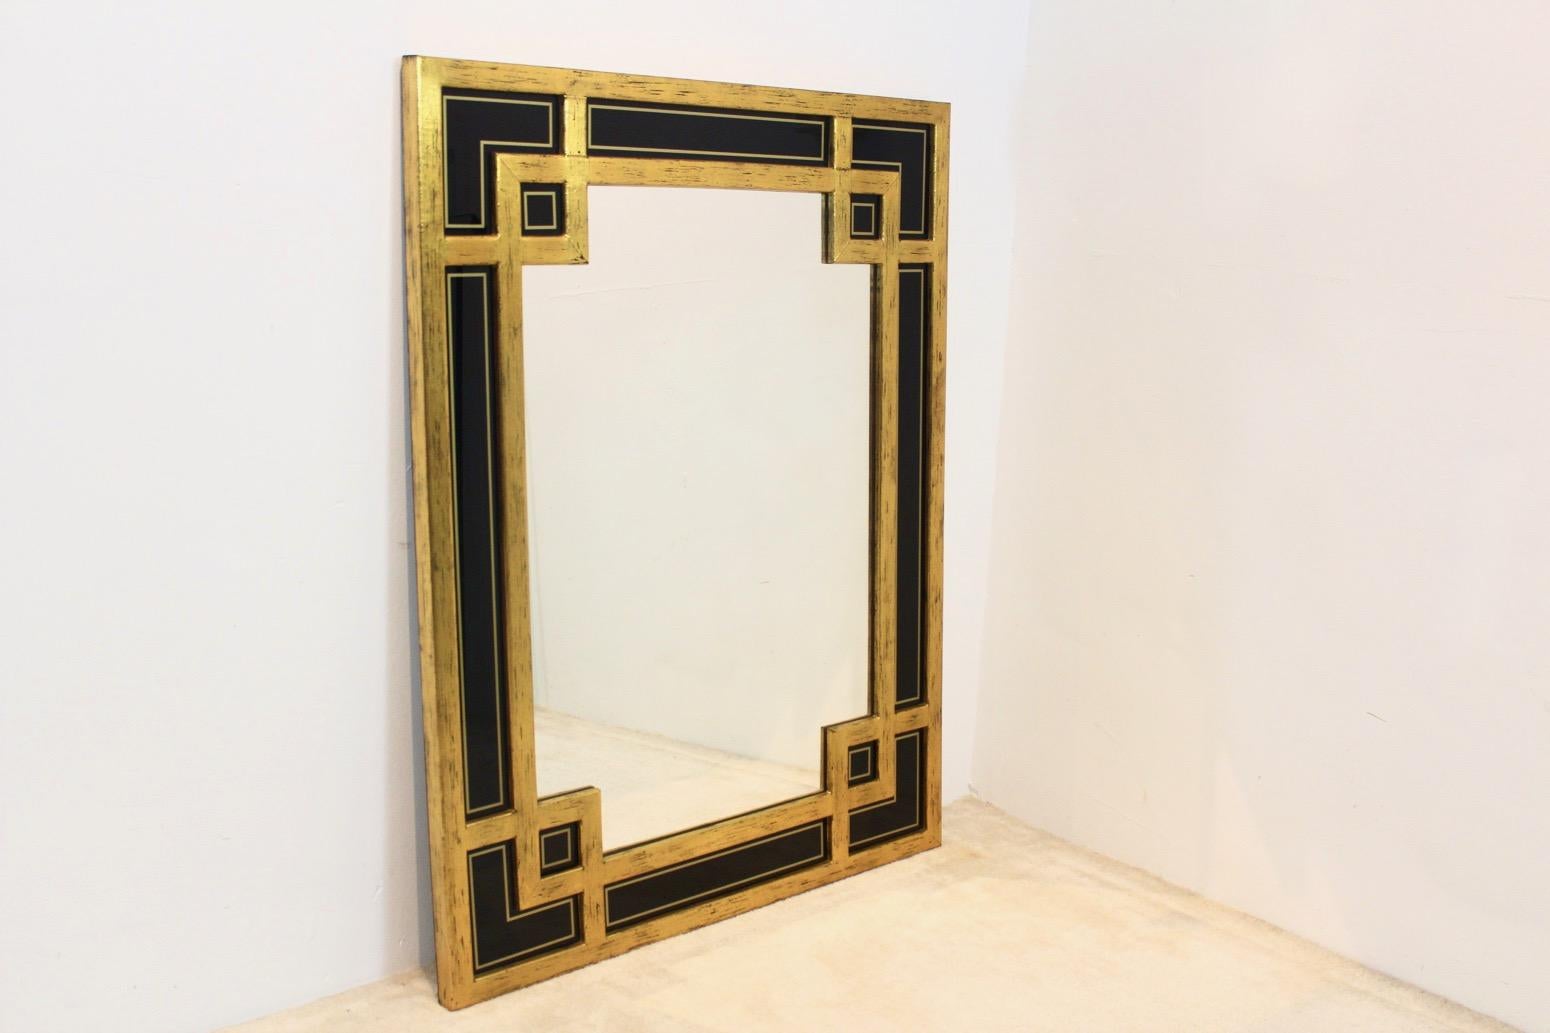 Beautiful large giltwood framed mirror with sophisticated Graphical pattern. Made in Belgium by Deknudt (marked) in the 1970s. Very elegant with beautiful and unique inset black glass panels on the side and gold-leaf (marked) on the wood. The mirror